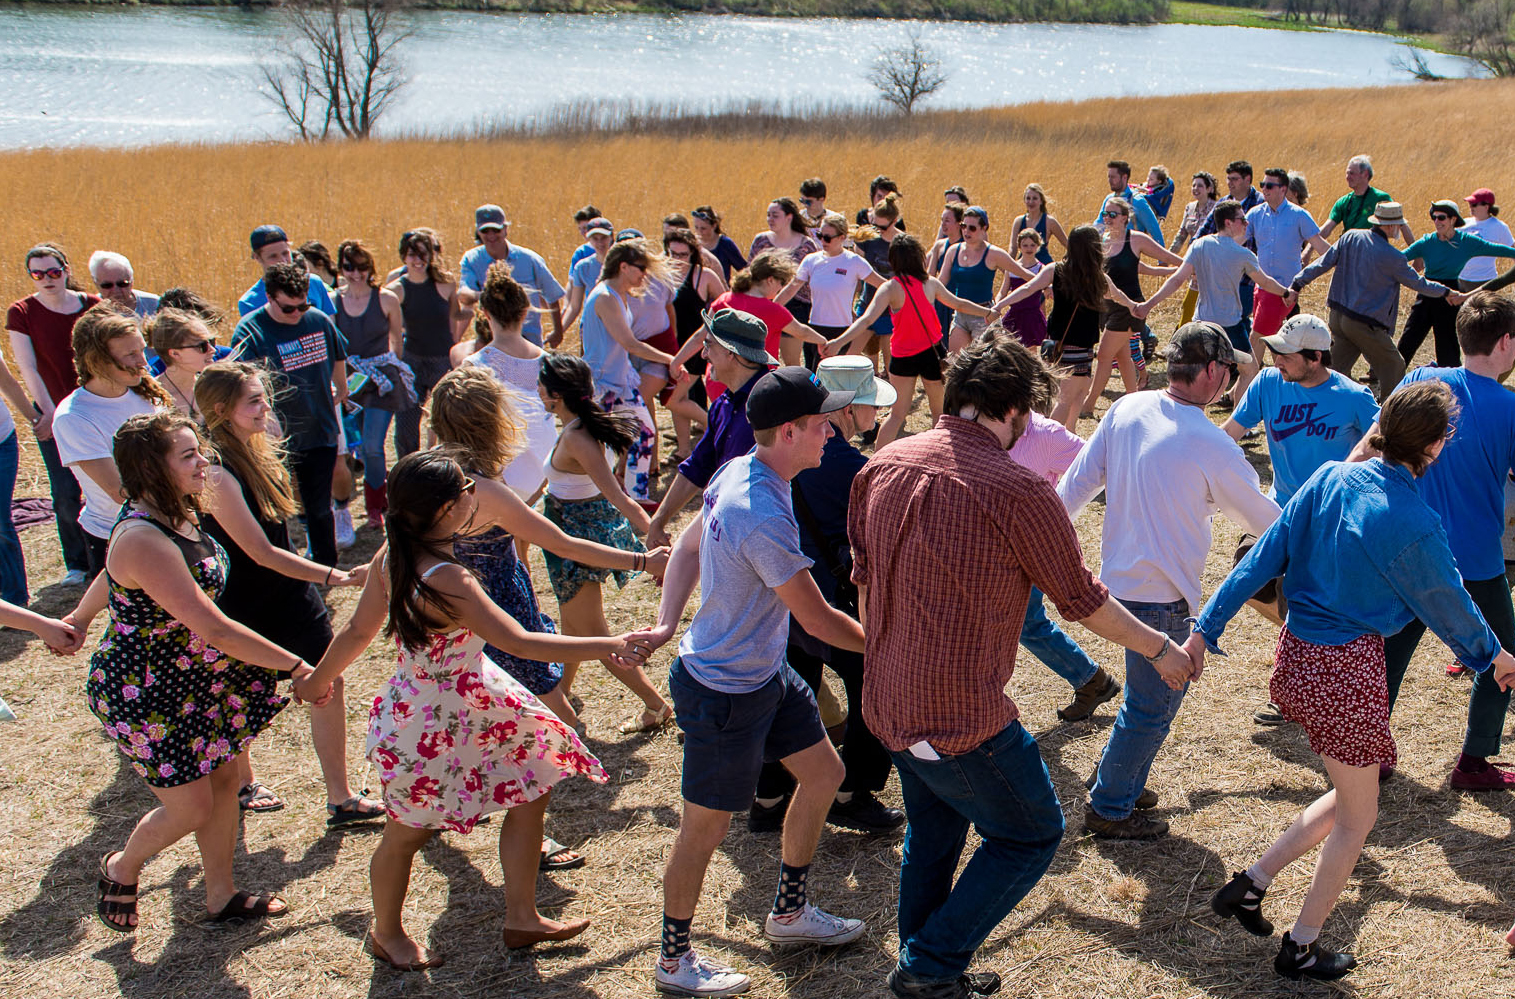 The Grinnell community gathers at the College’s [Conard Environmental Research Area](https://www.grinnell.edu/academics/majors-concentrations/biology/cera) to celebrate the National Water Dance in 2016.